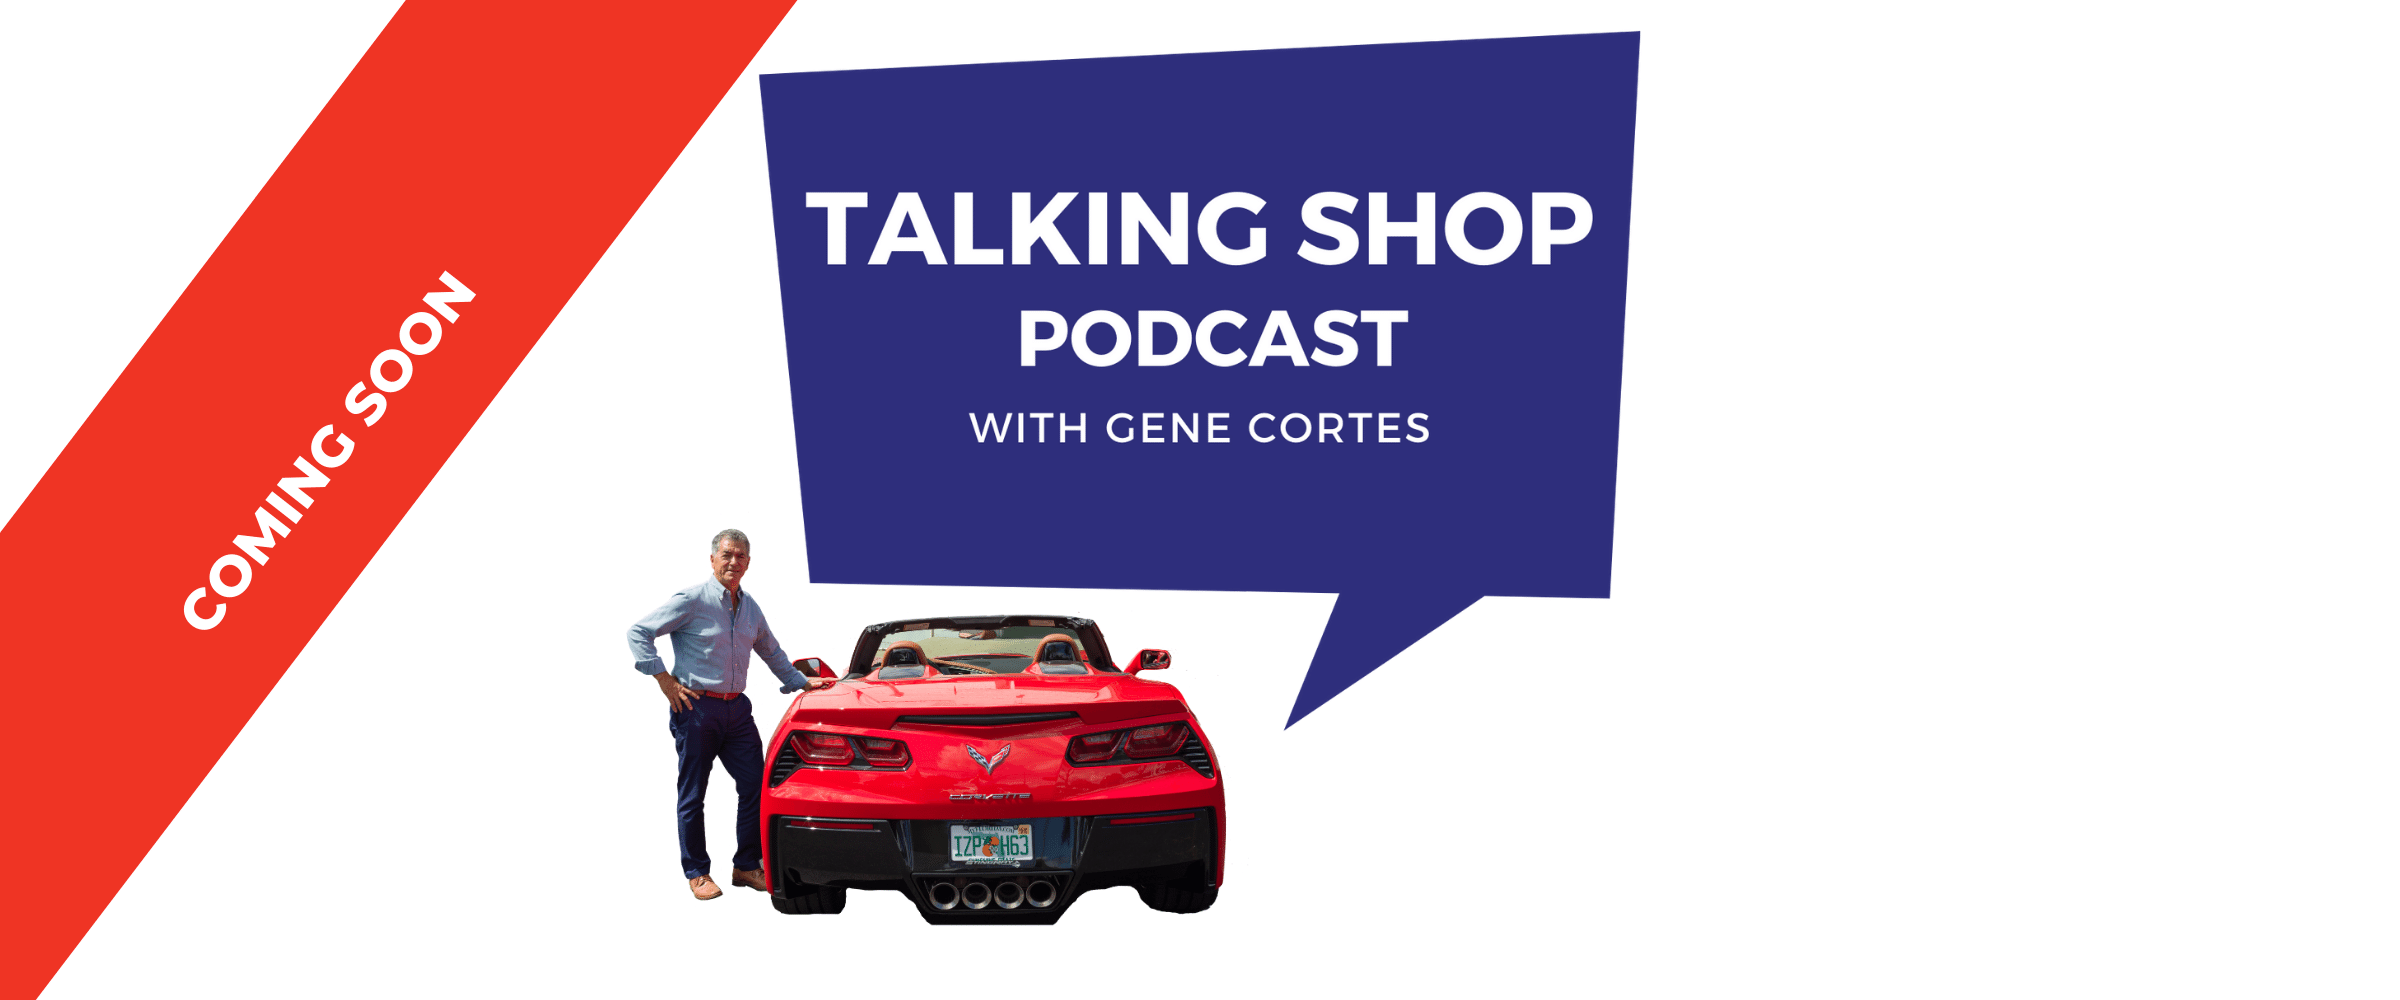 Taling-shop-podcast